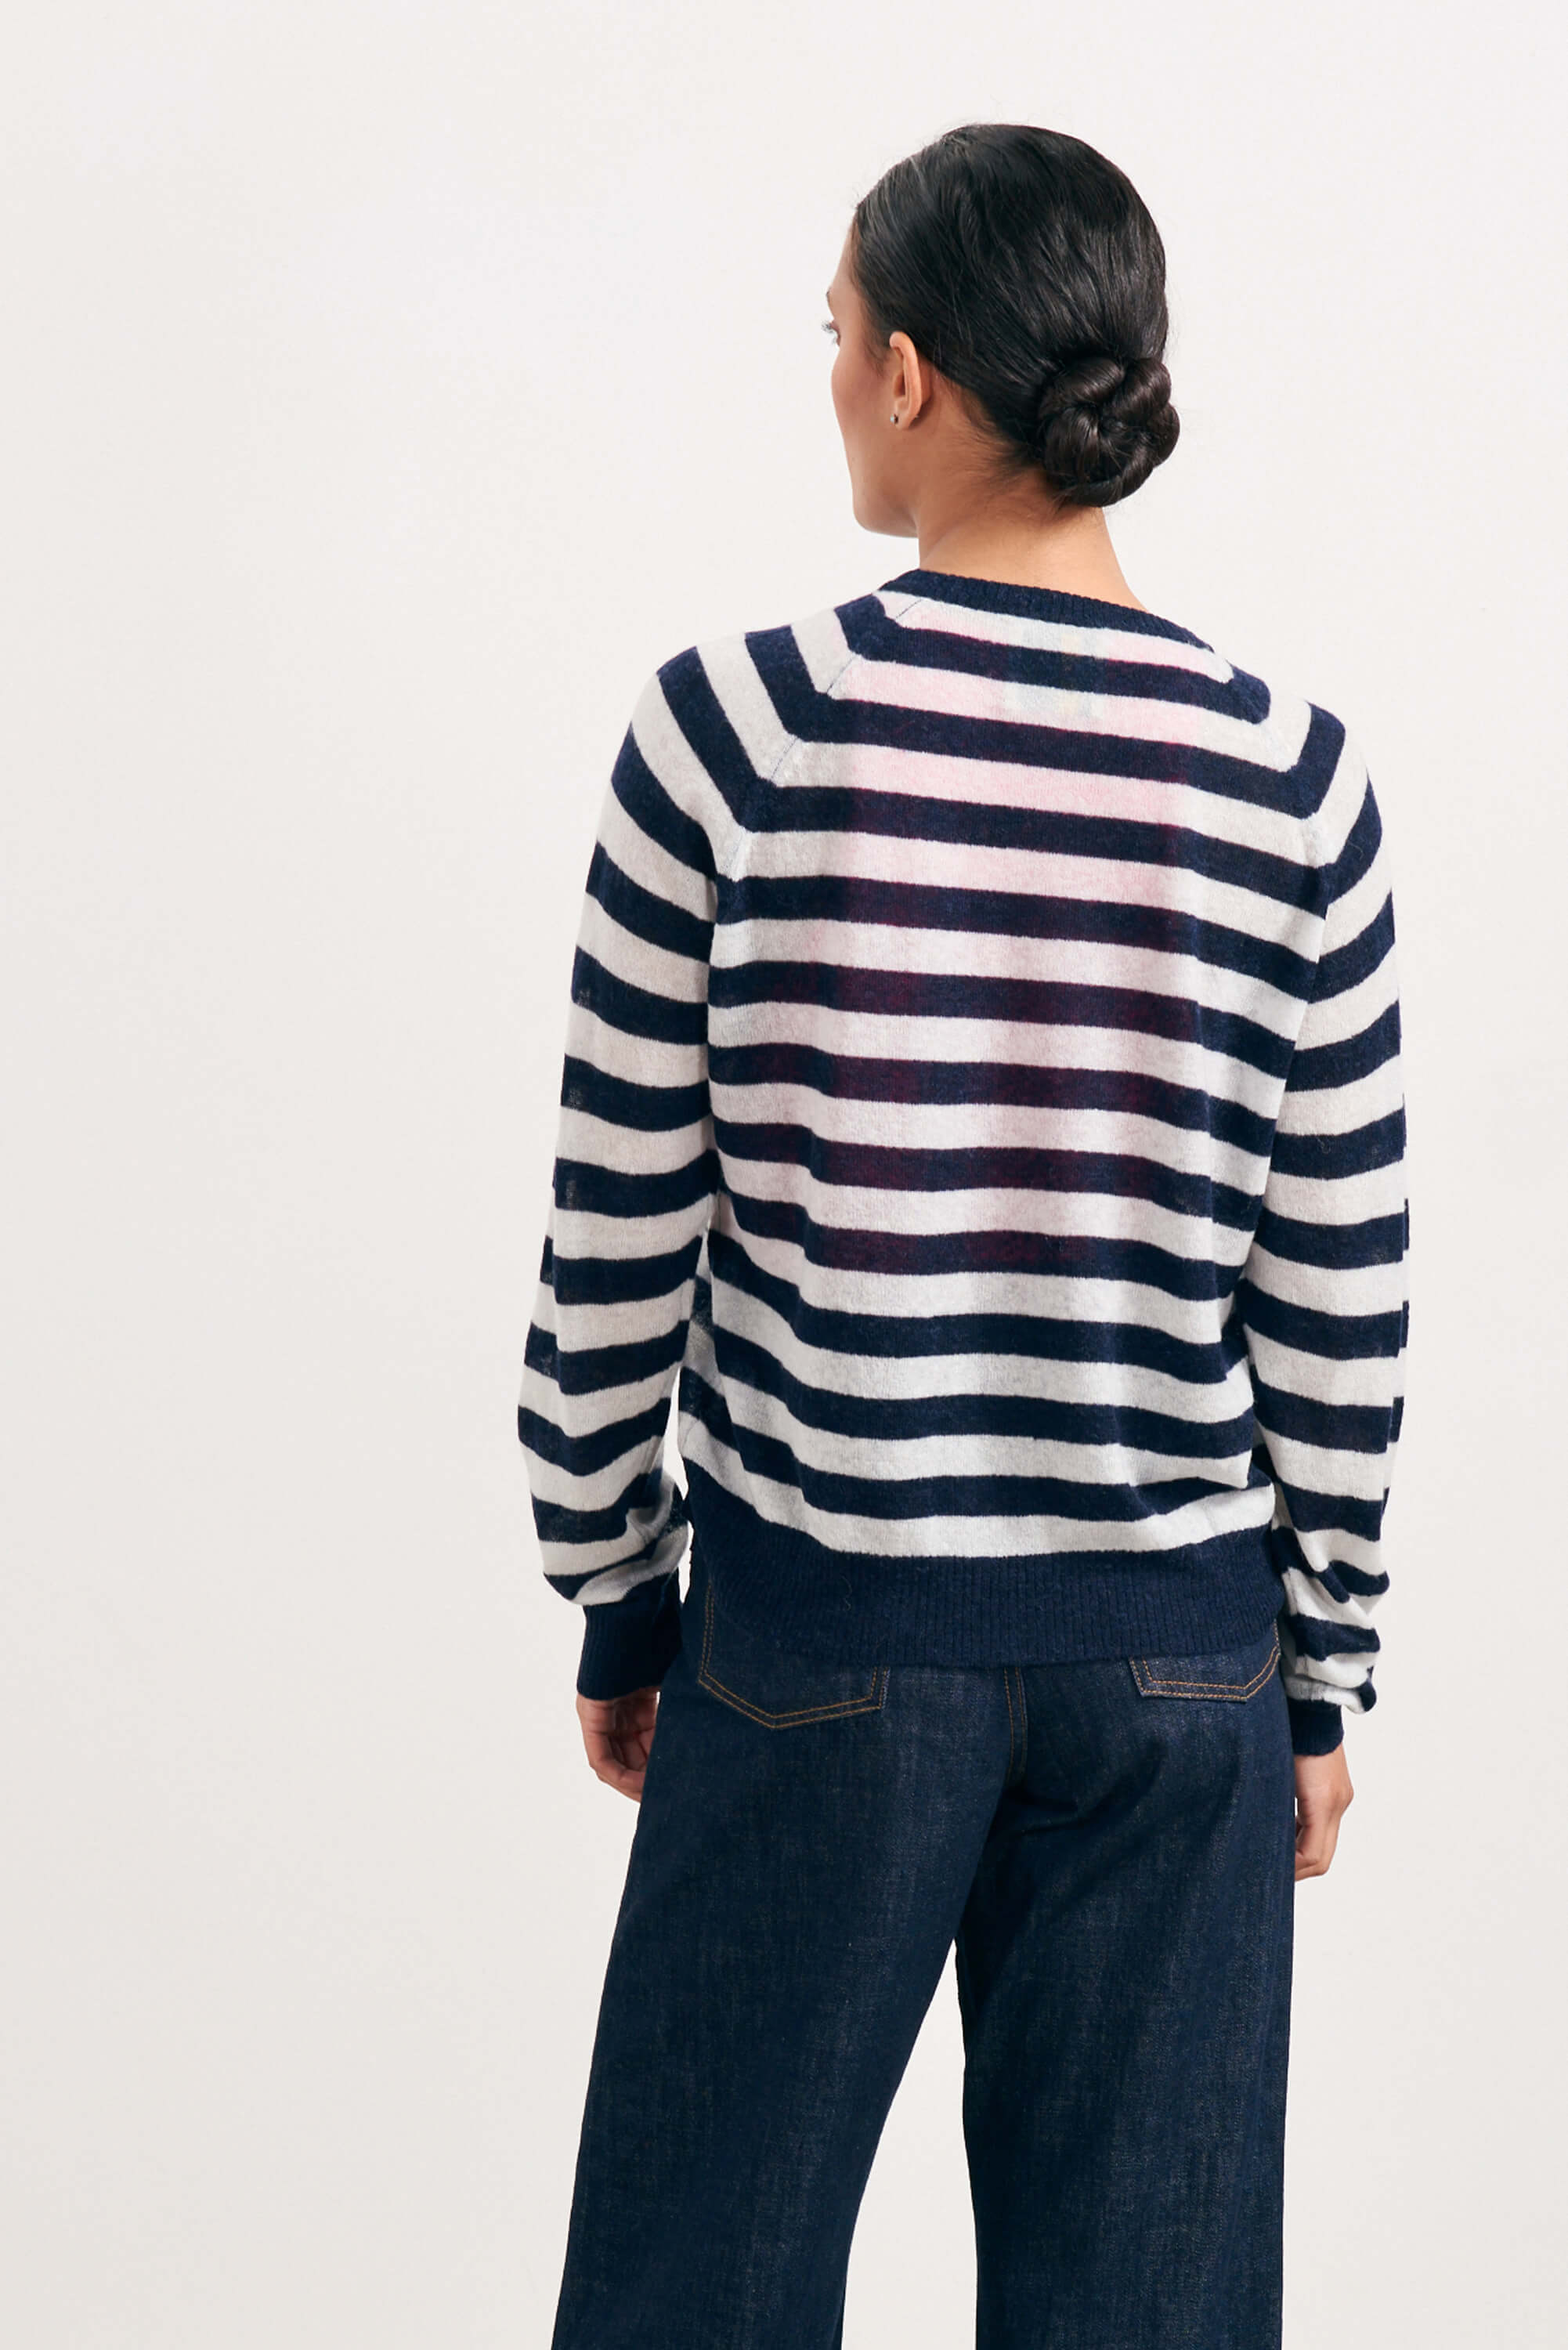 Brown haired female model wearing Jumper1234 bright navy and cream lightweight merino "Stripe crew" facing away from the camera